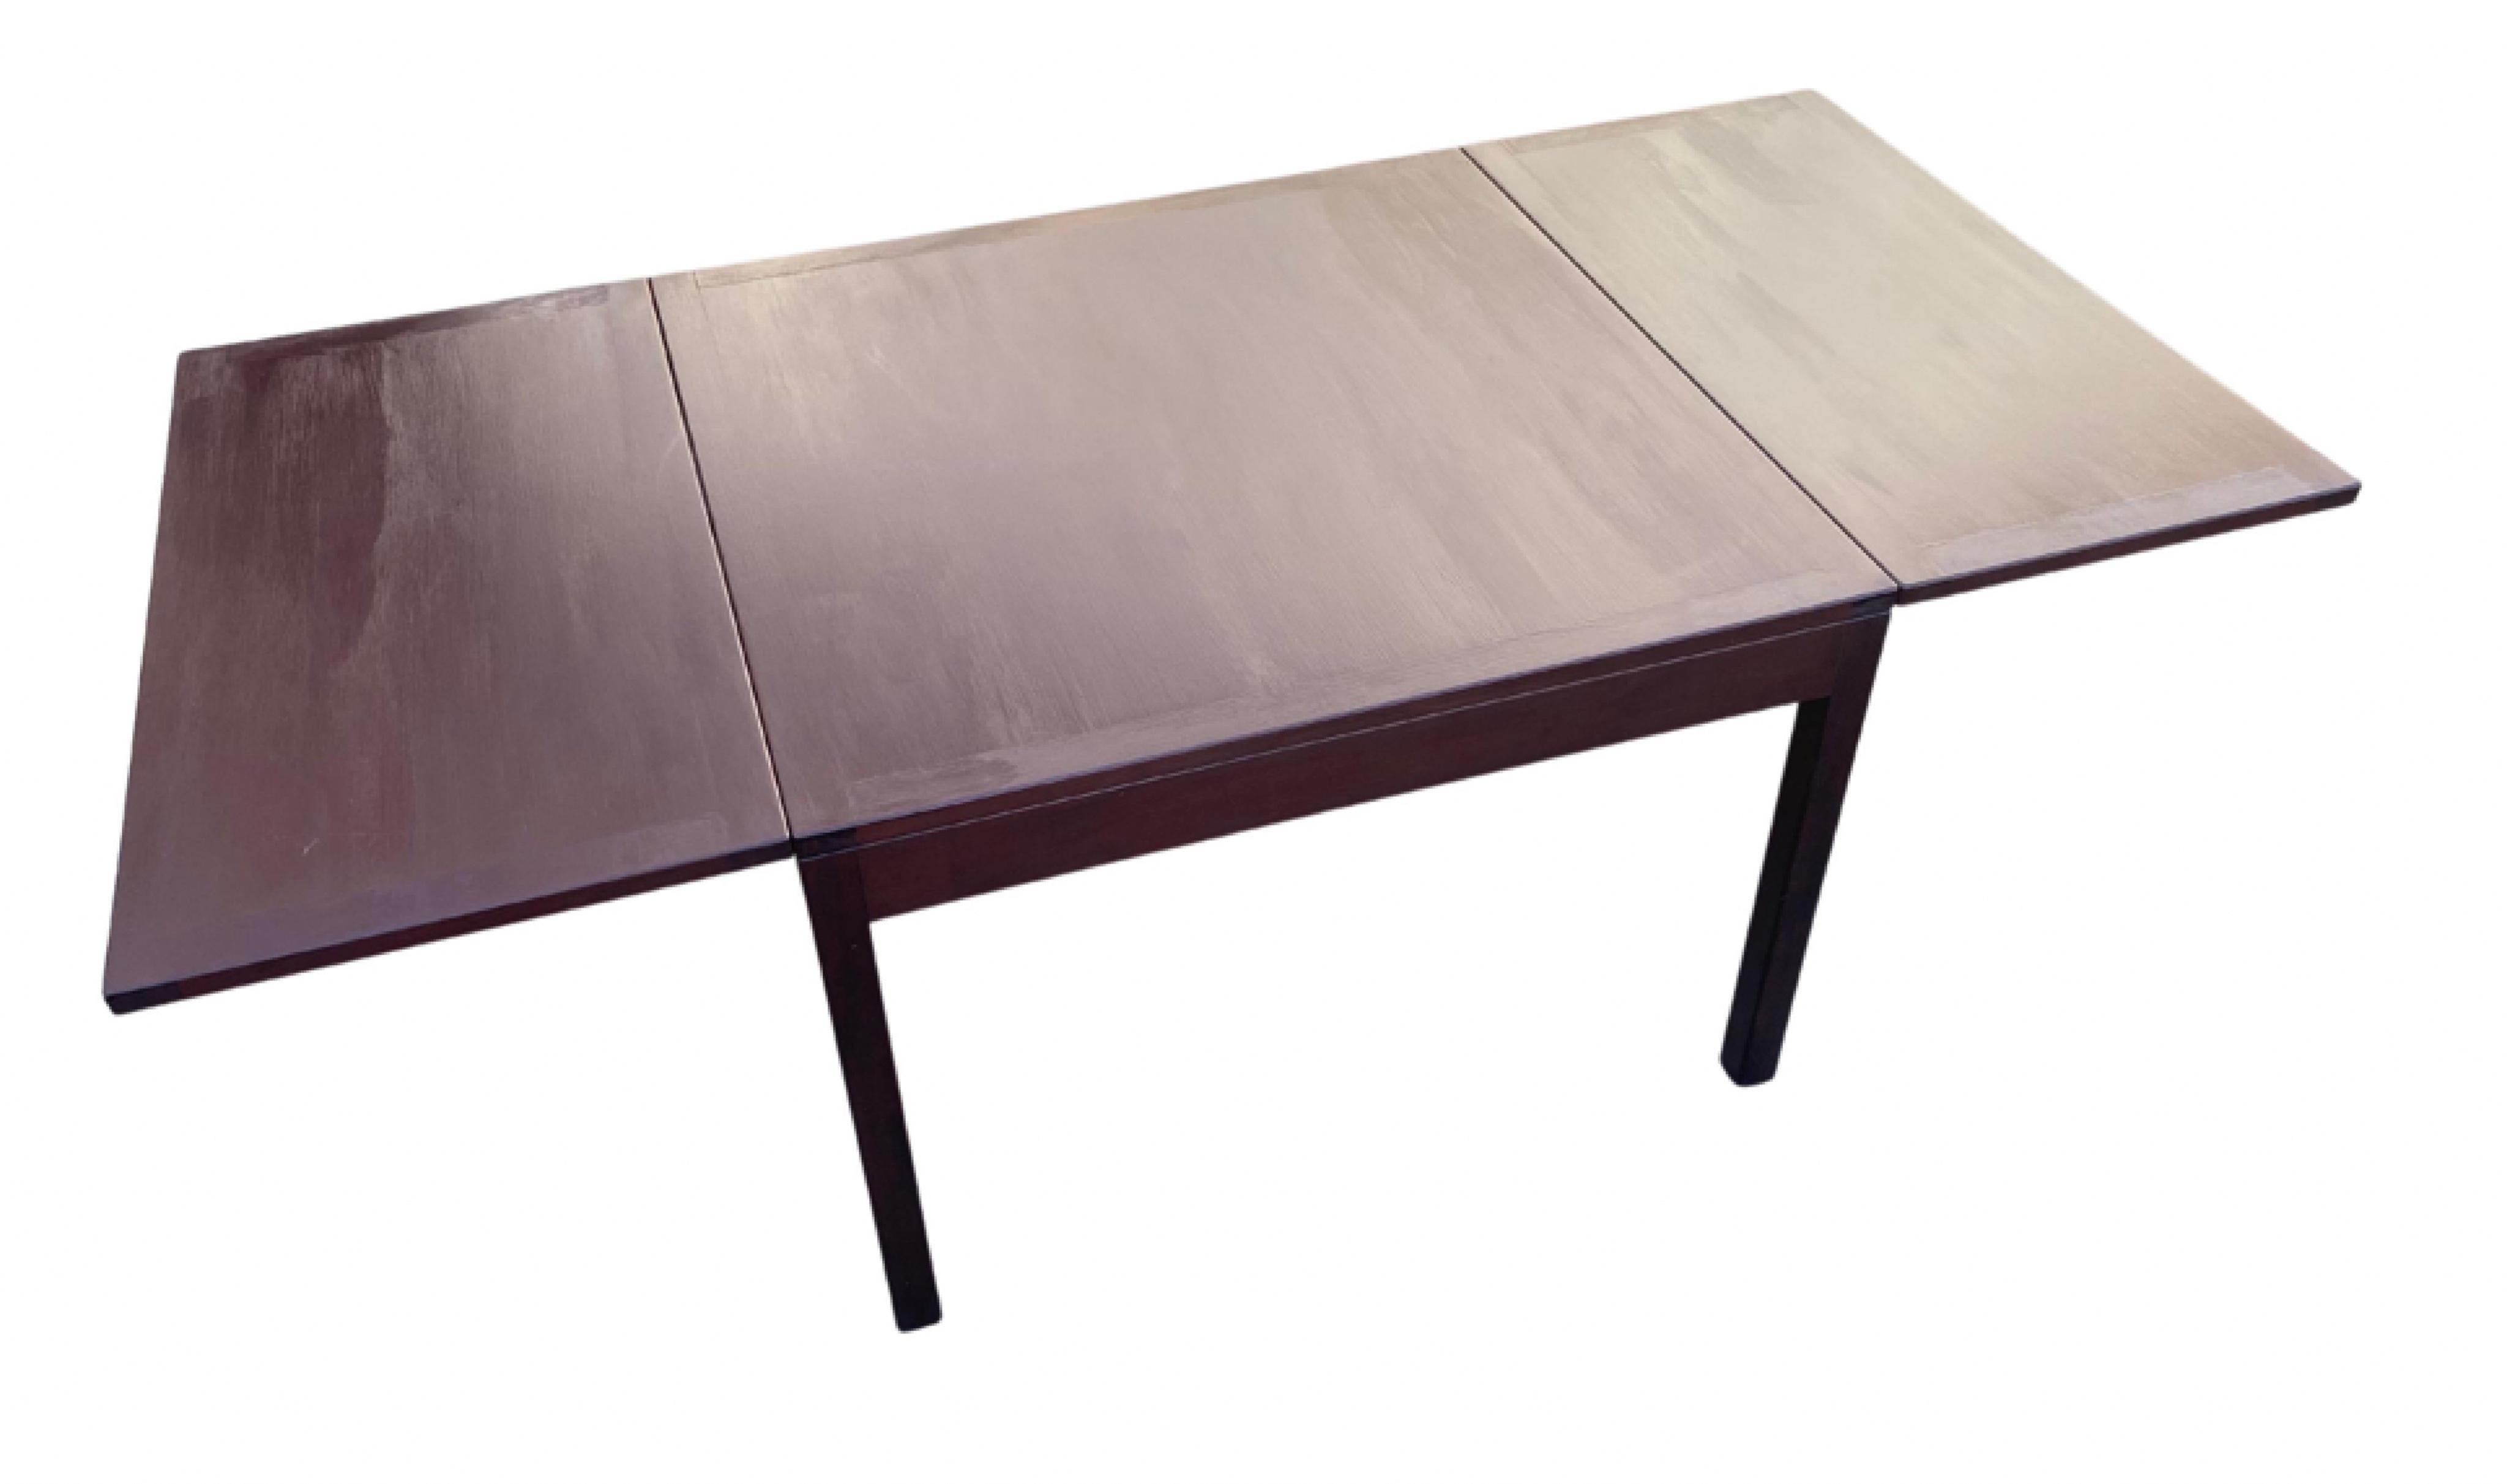 20th Century Børge Mogensen Extendable Mahogany Coffee Table 5362, Fredericia Stolefabrik For Sale